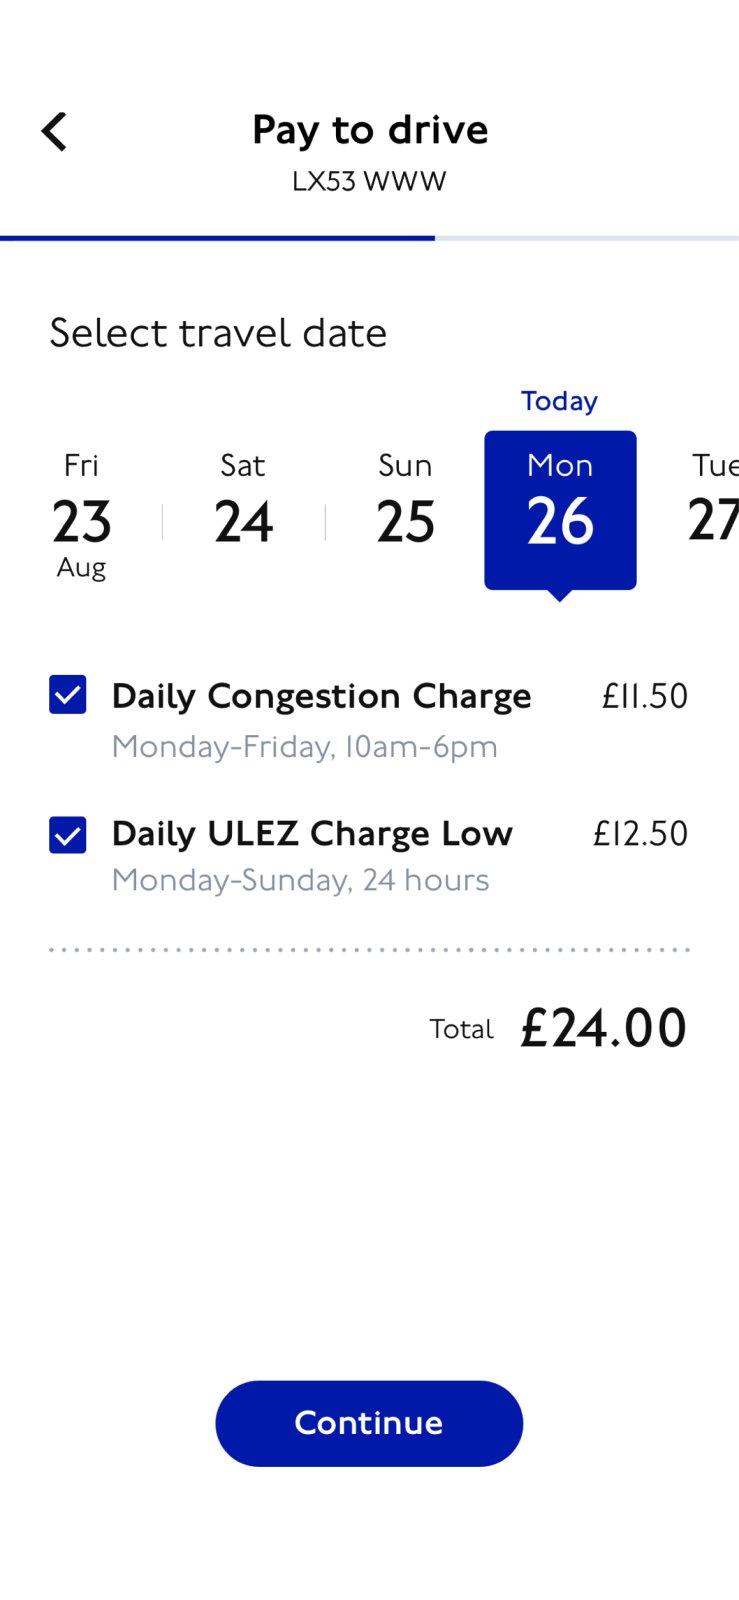 Tfl Pay to Drive app screen for selecting date and applicable charges